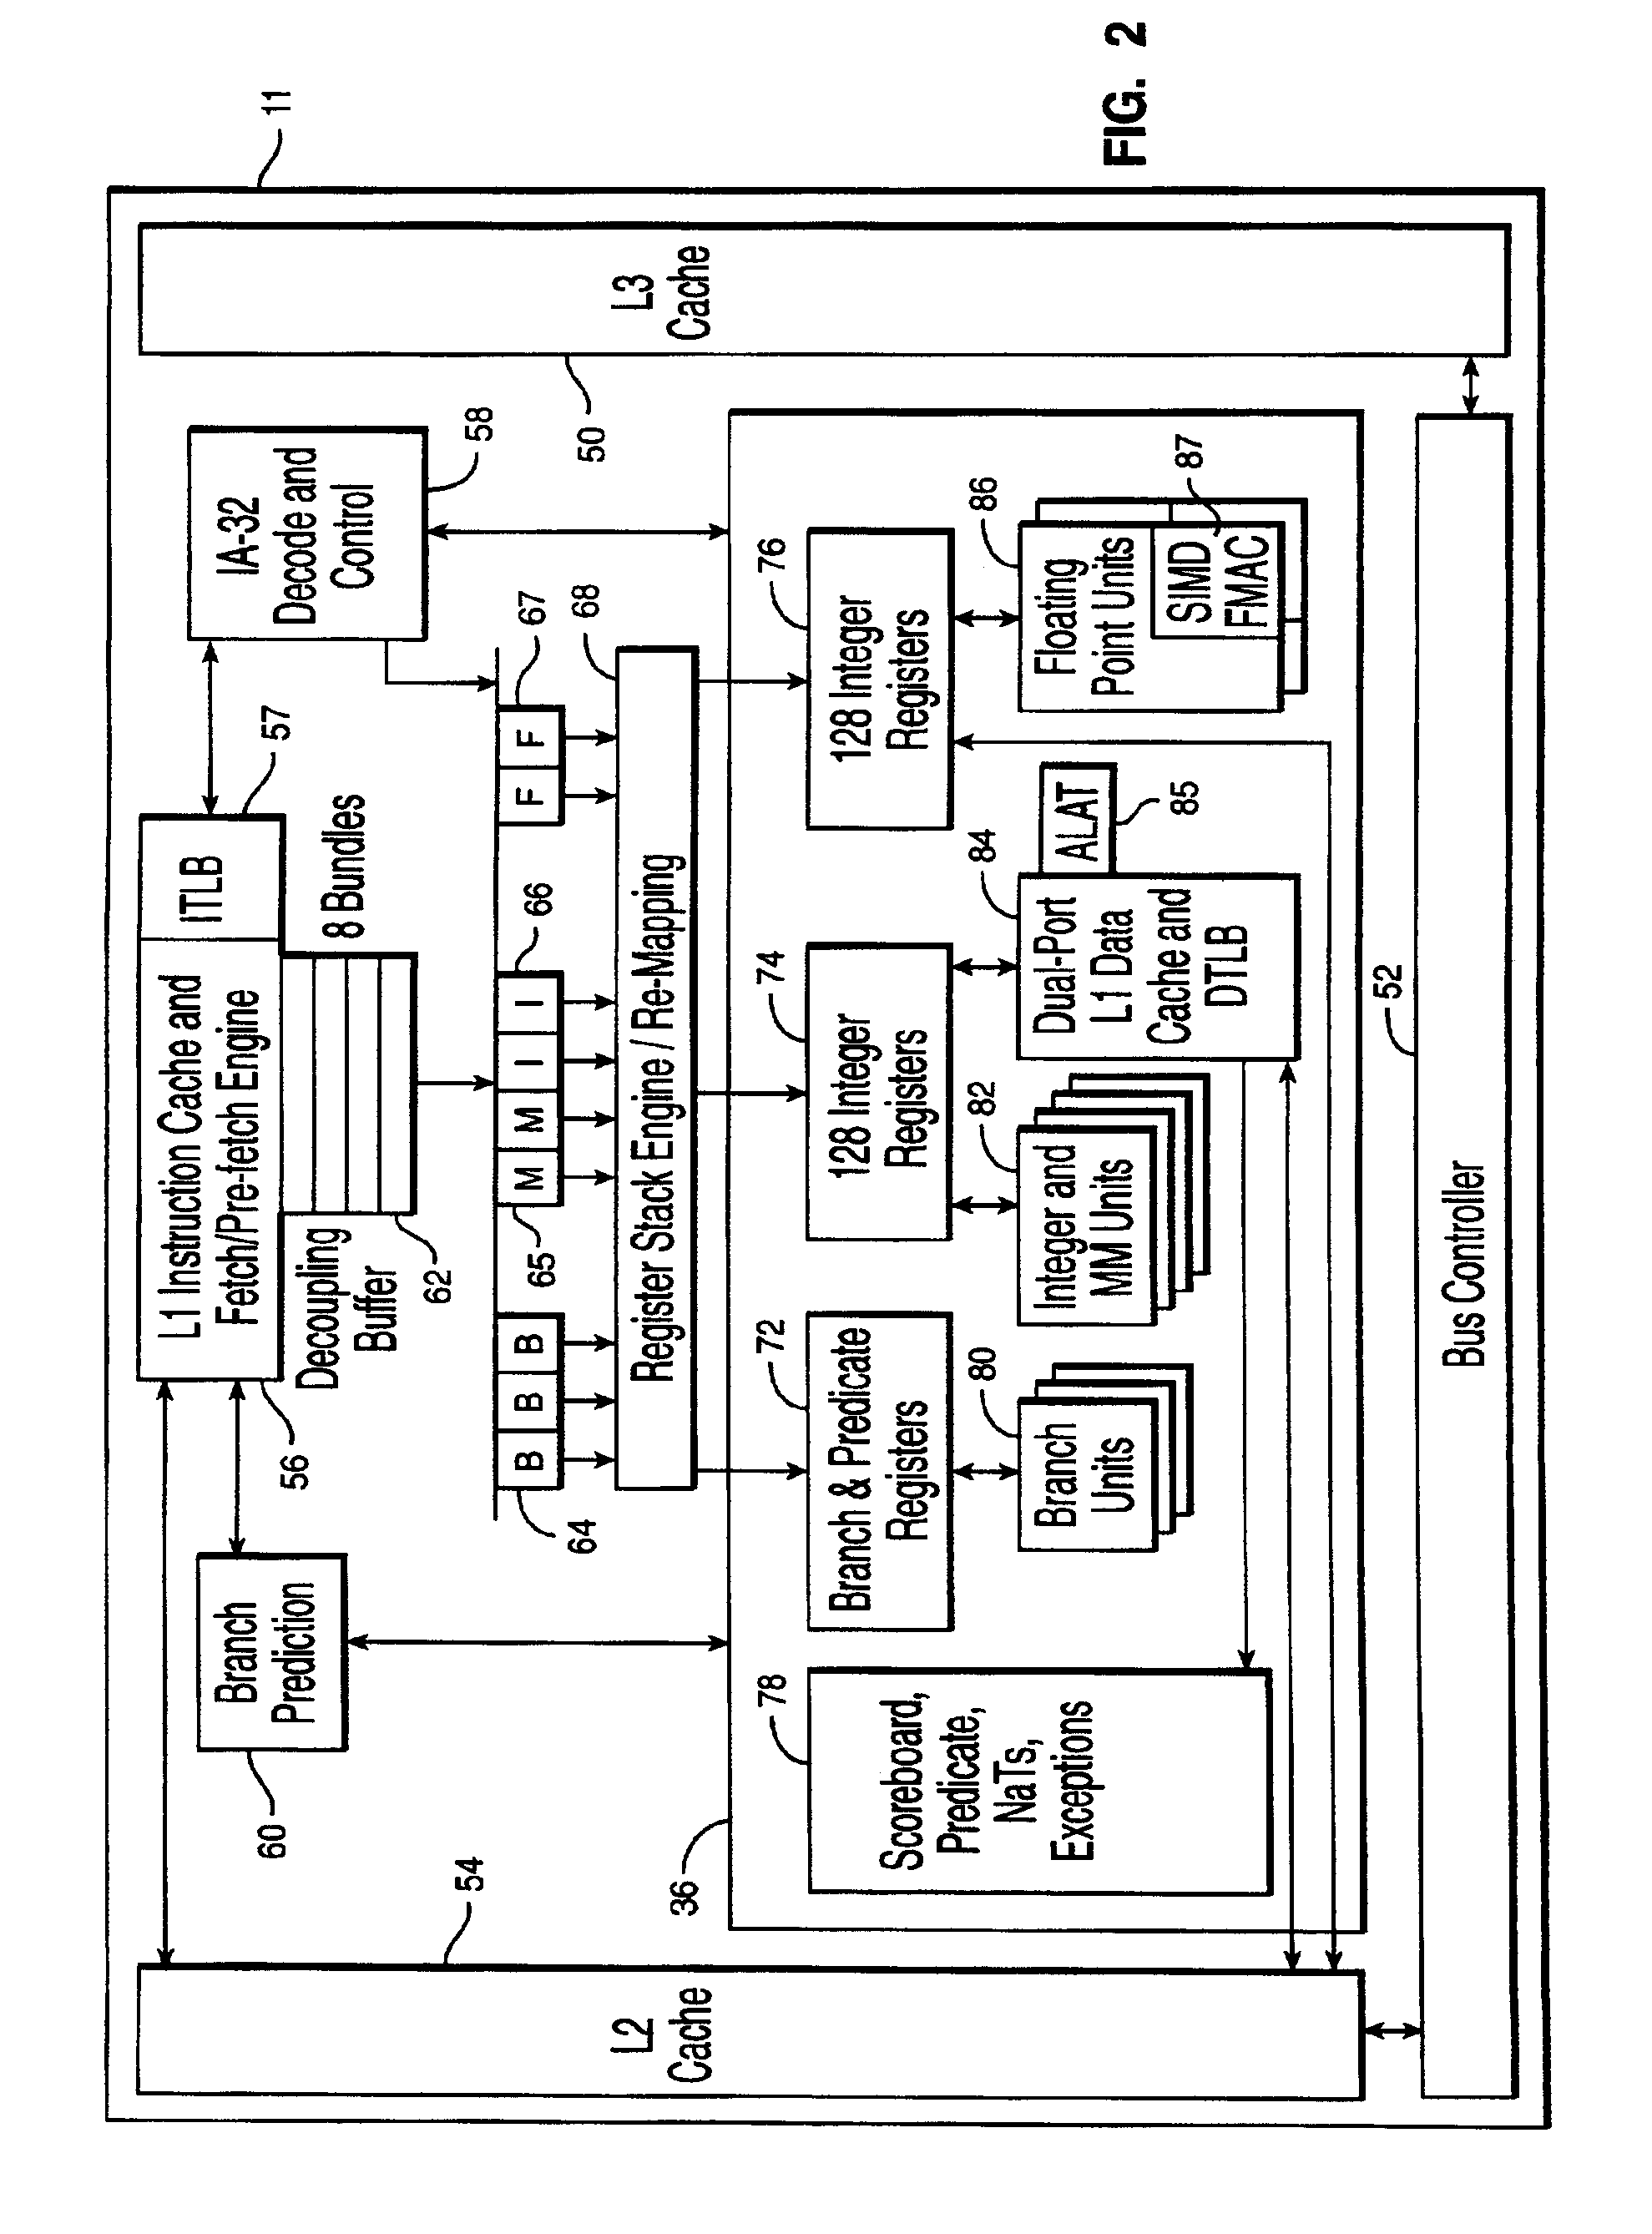 Microprocessor for executing speculative load instructions with retry of speculative load instruction without calling any recovery procedures